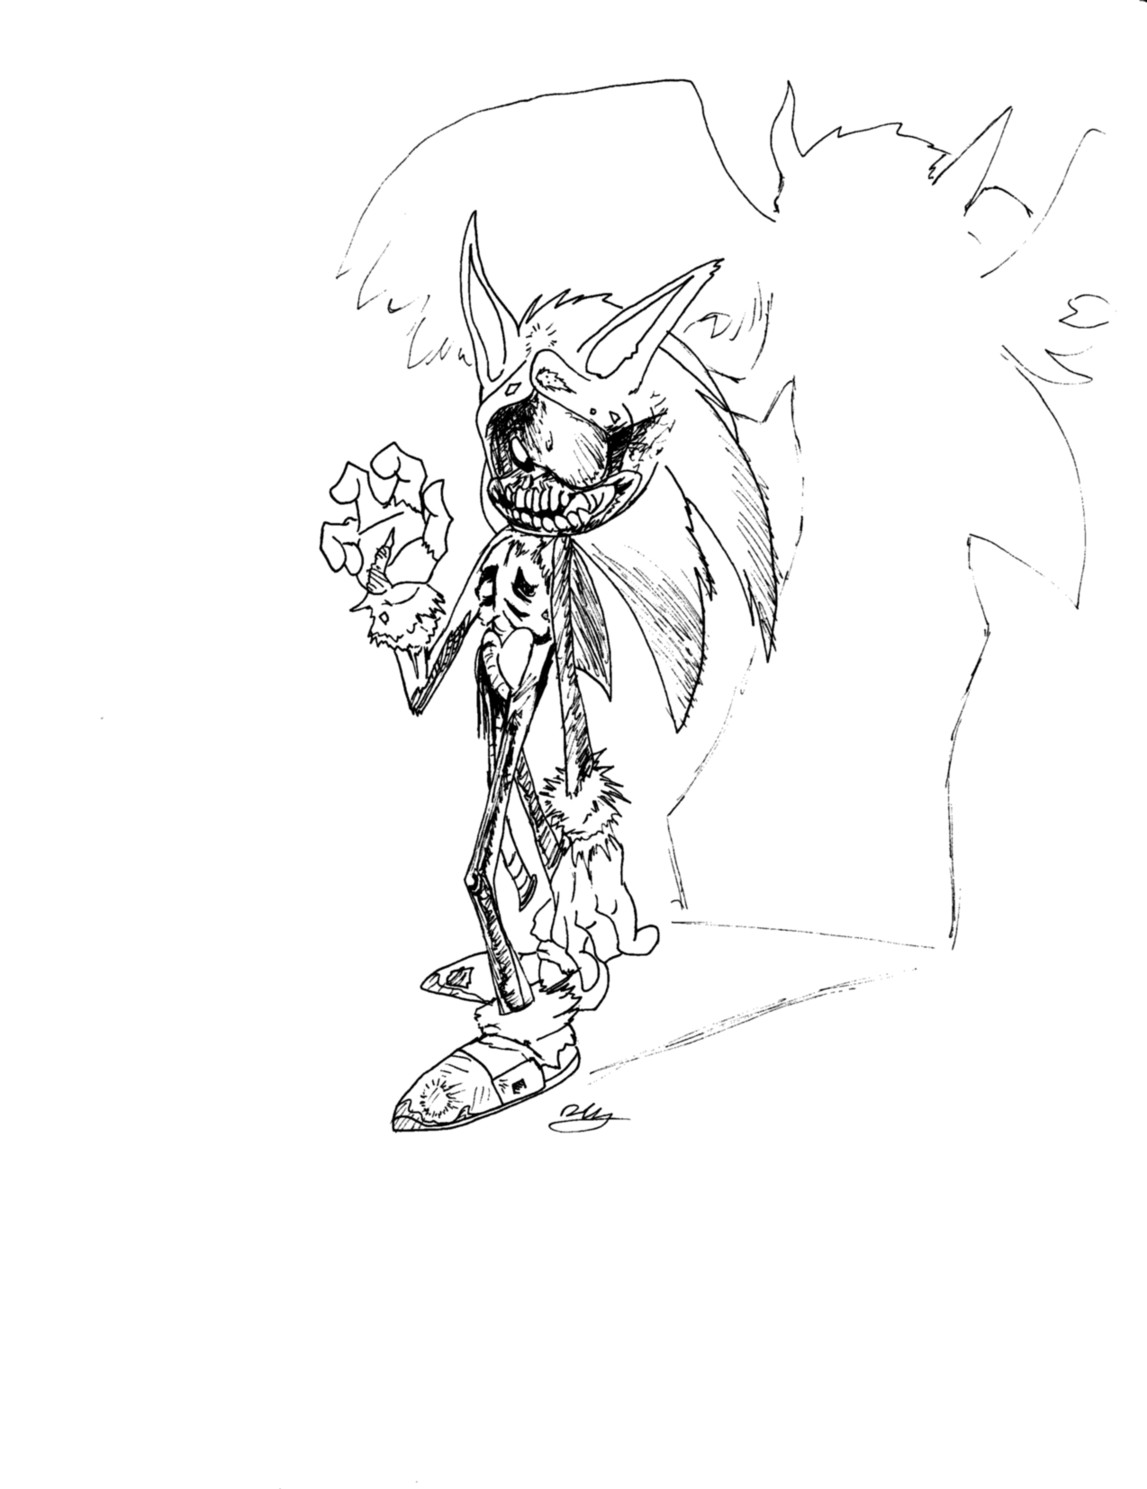 ZOMBEH SONIC! by TheGameArtCritic